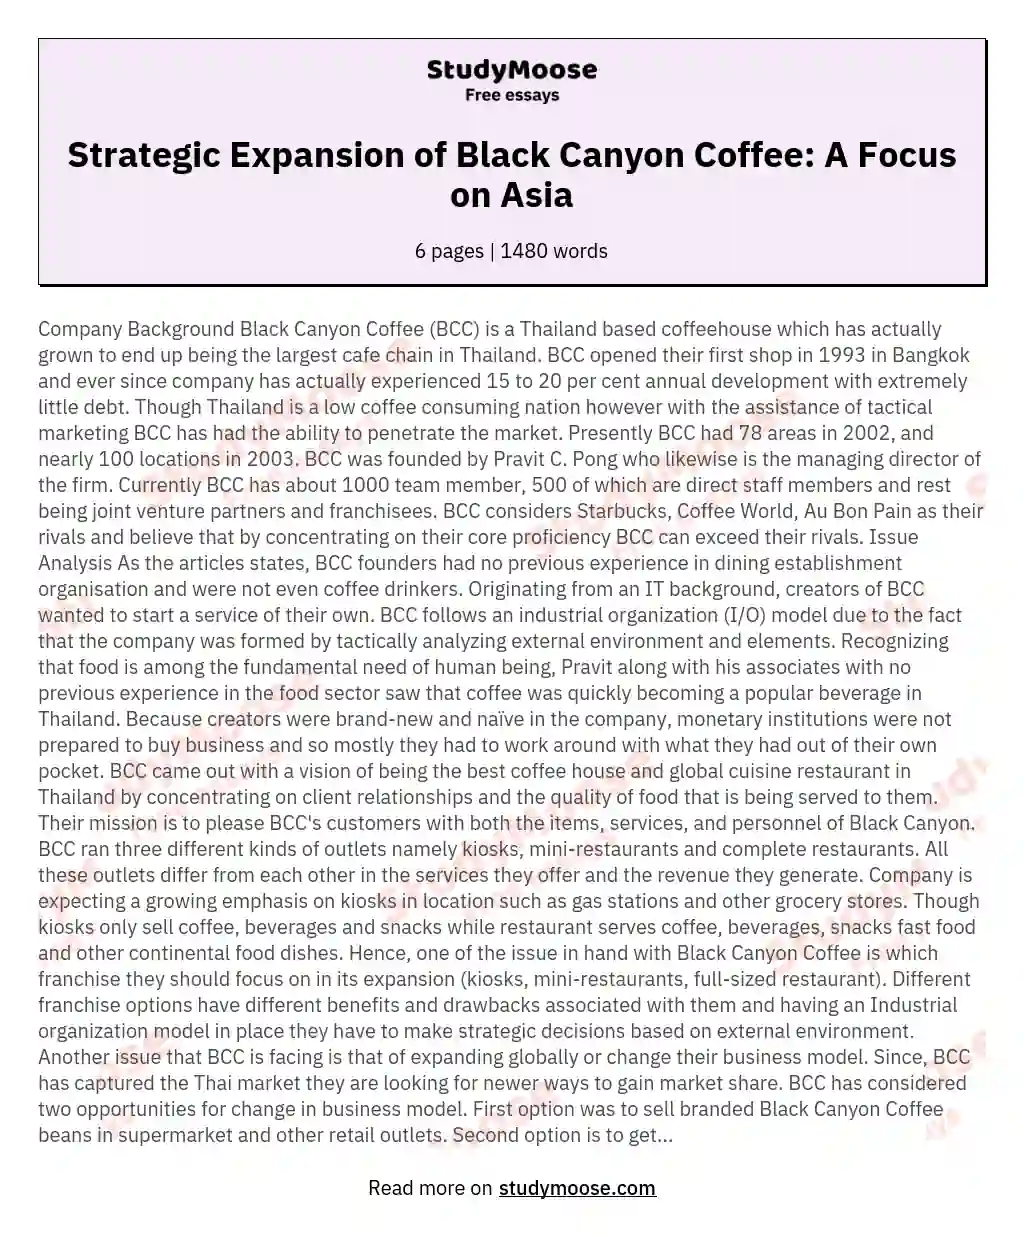 Strategic Expansion of Black Canyon Coffee: A Focus on Asia essay